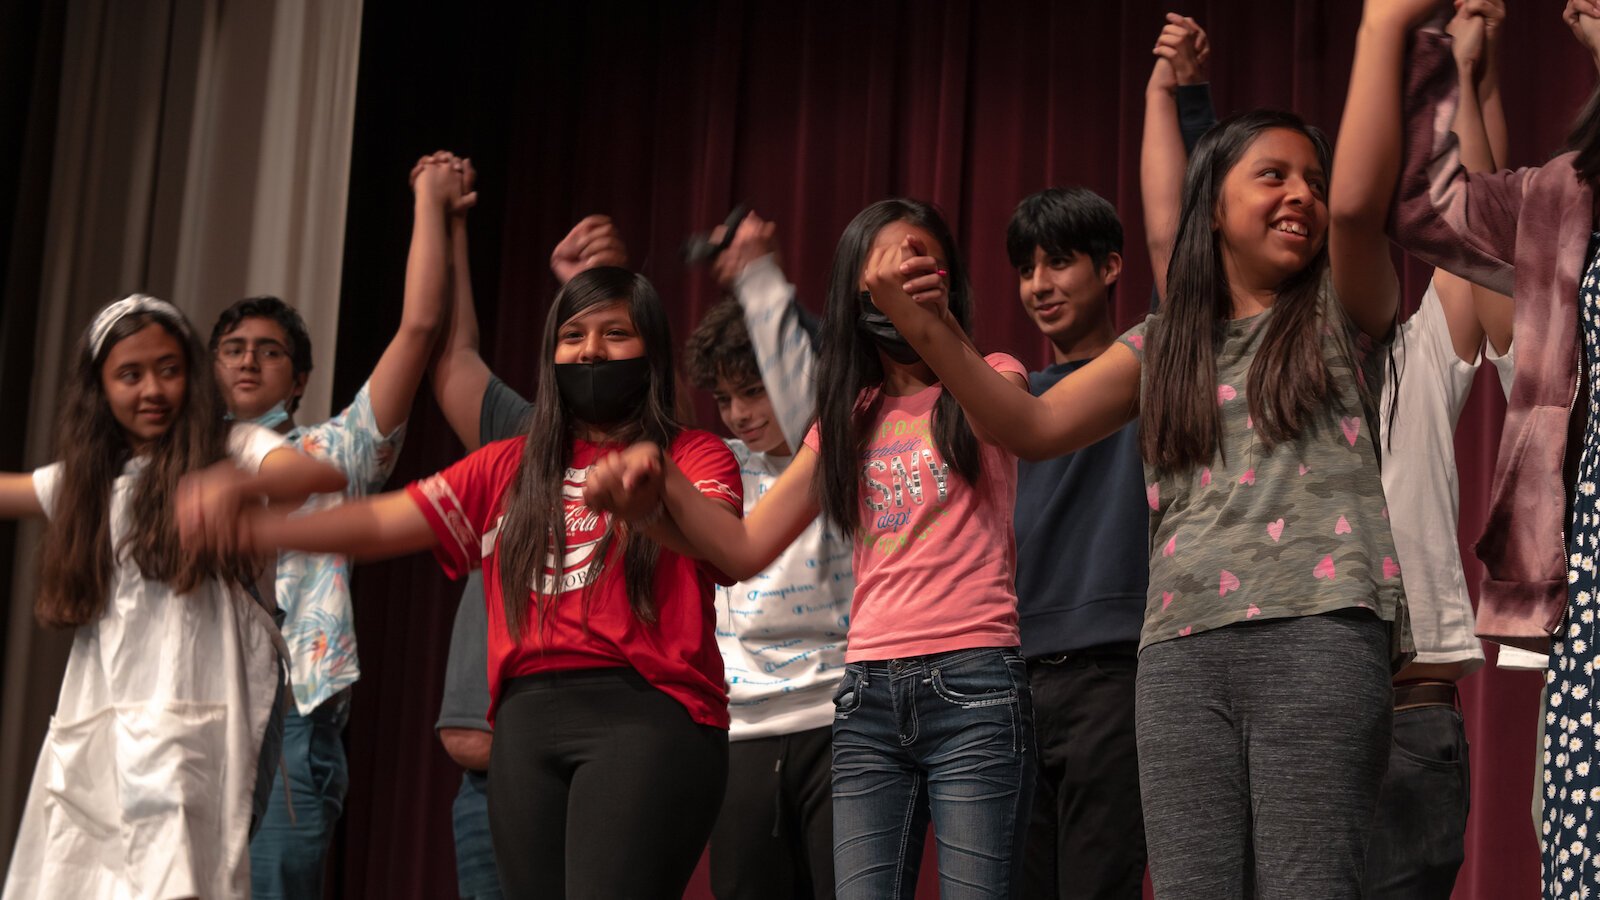 Over the course of 16 weeks in the 2020-2021 school year, students participated in 42 activities and 10 rehearsals, which culminated in a final performance—all exploring experiences central to their cultural identity in a rural community.